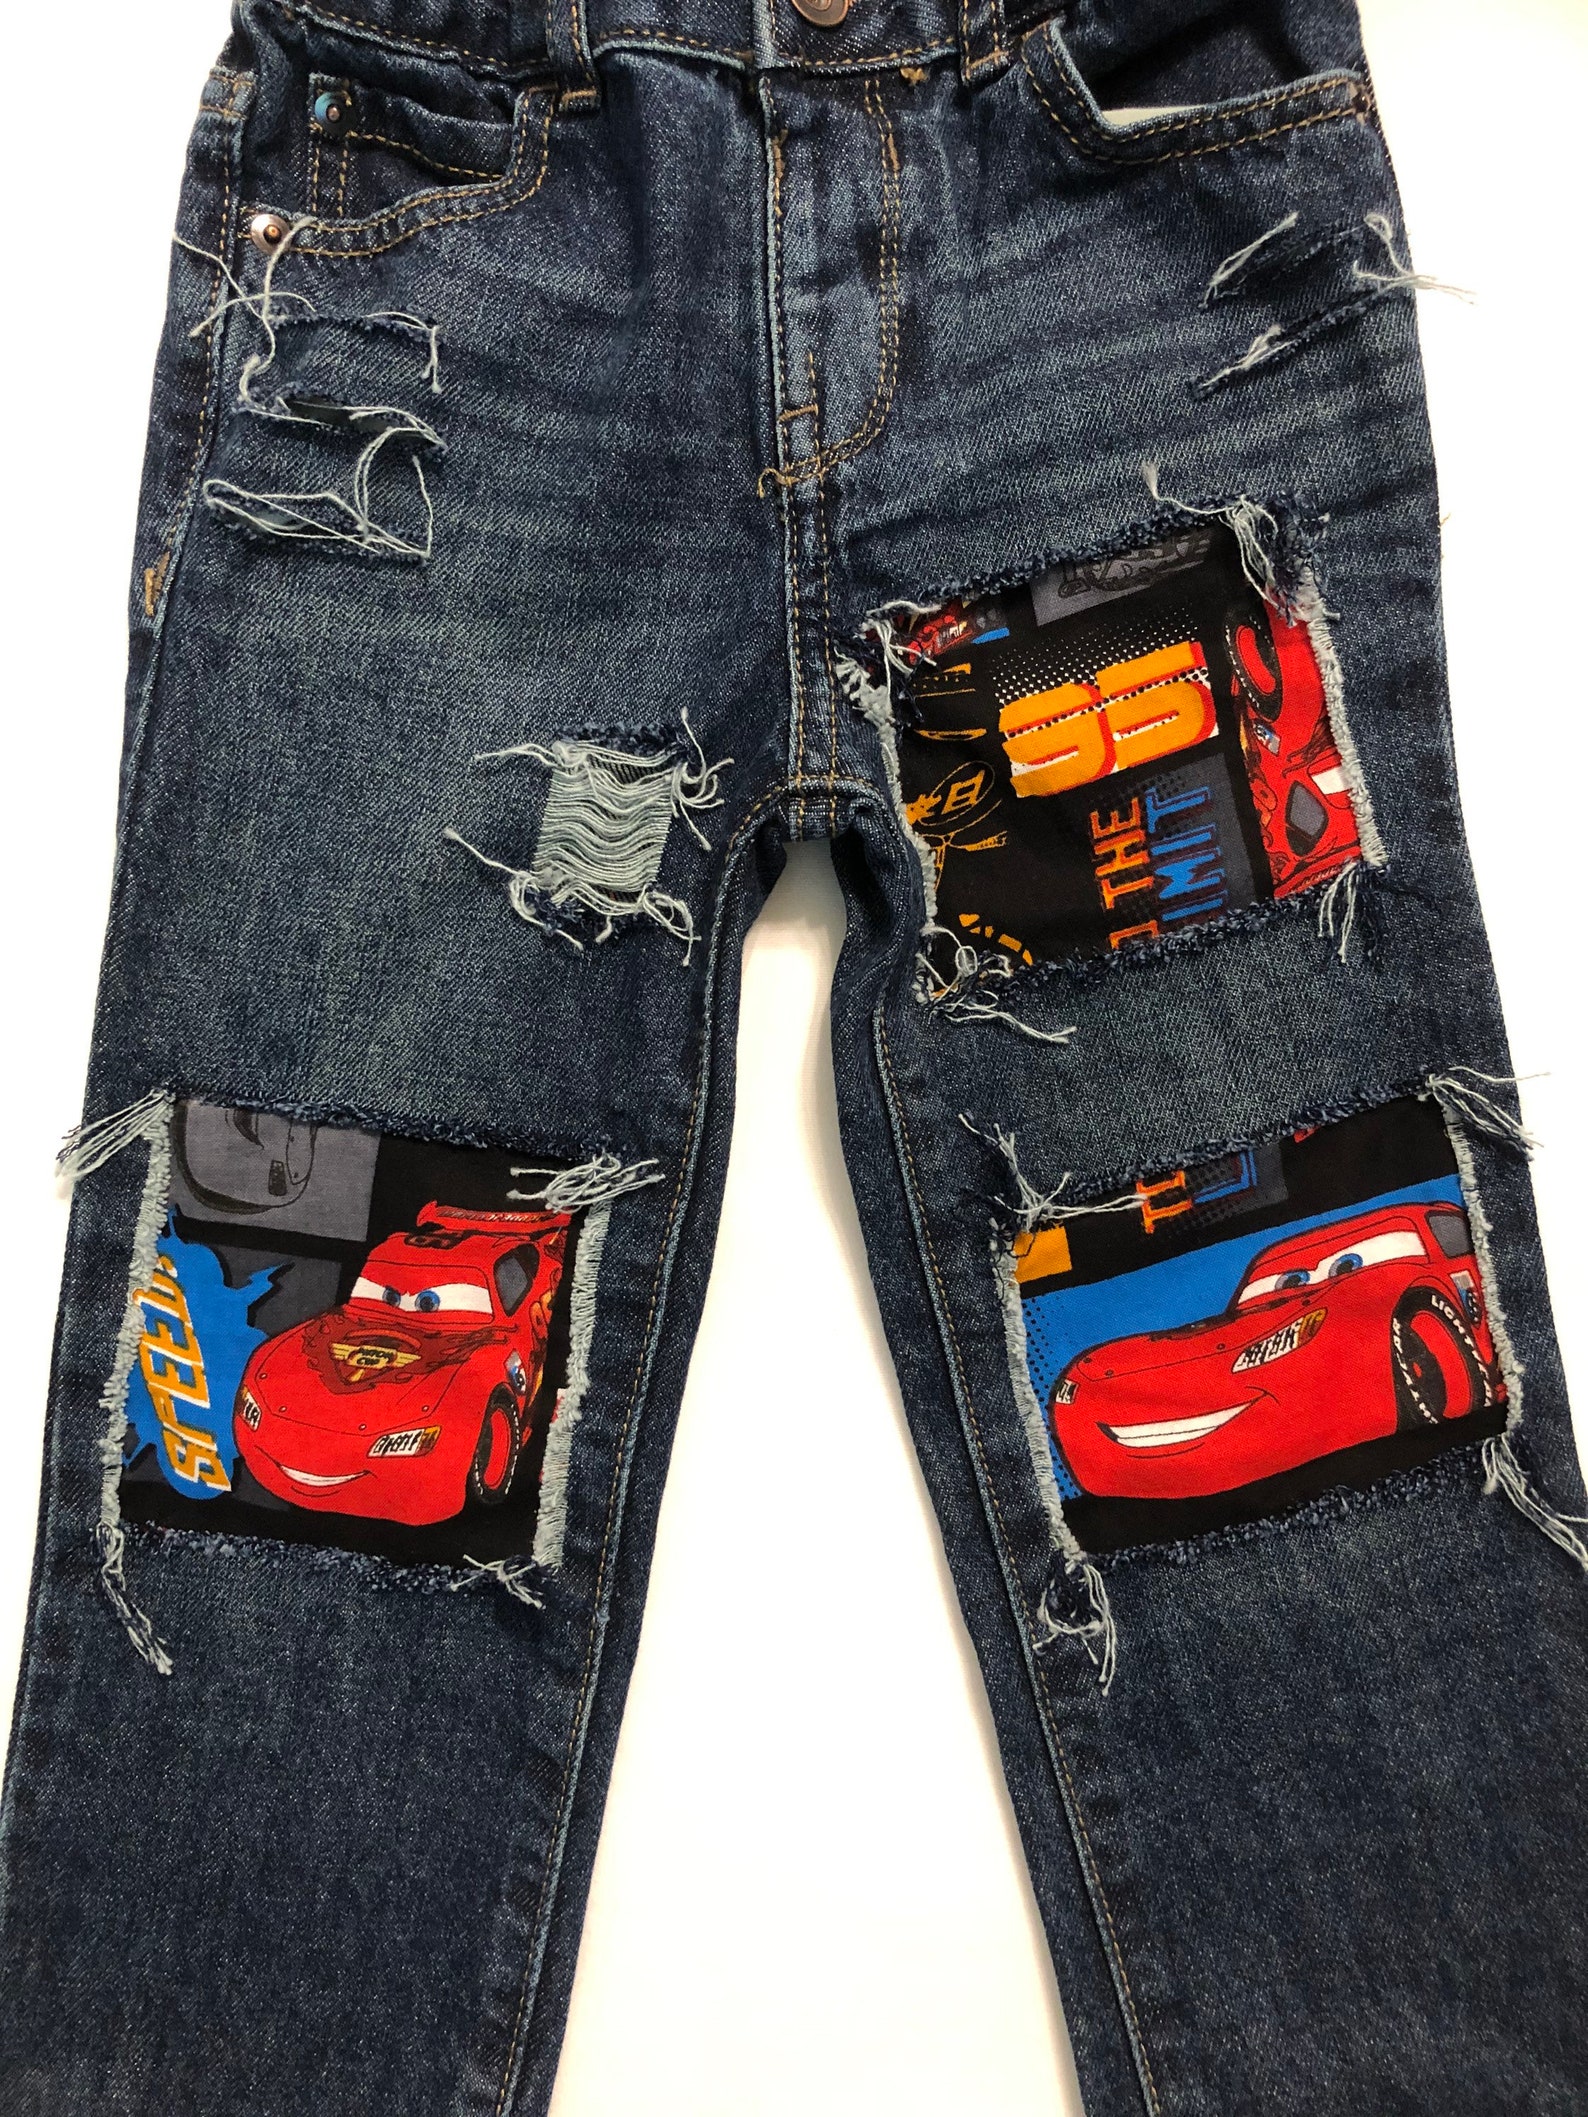 Cars boys birthday jeans cars patch ripped distressed jeans | Etsy